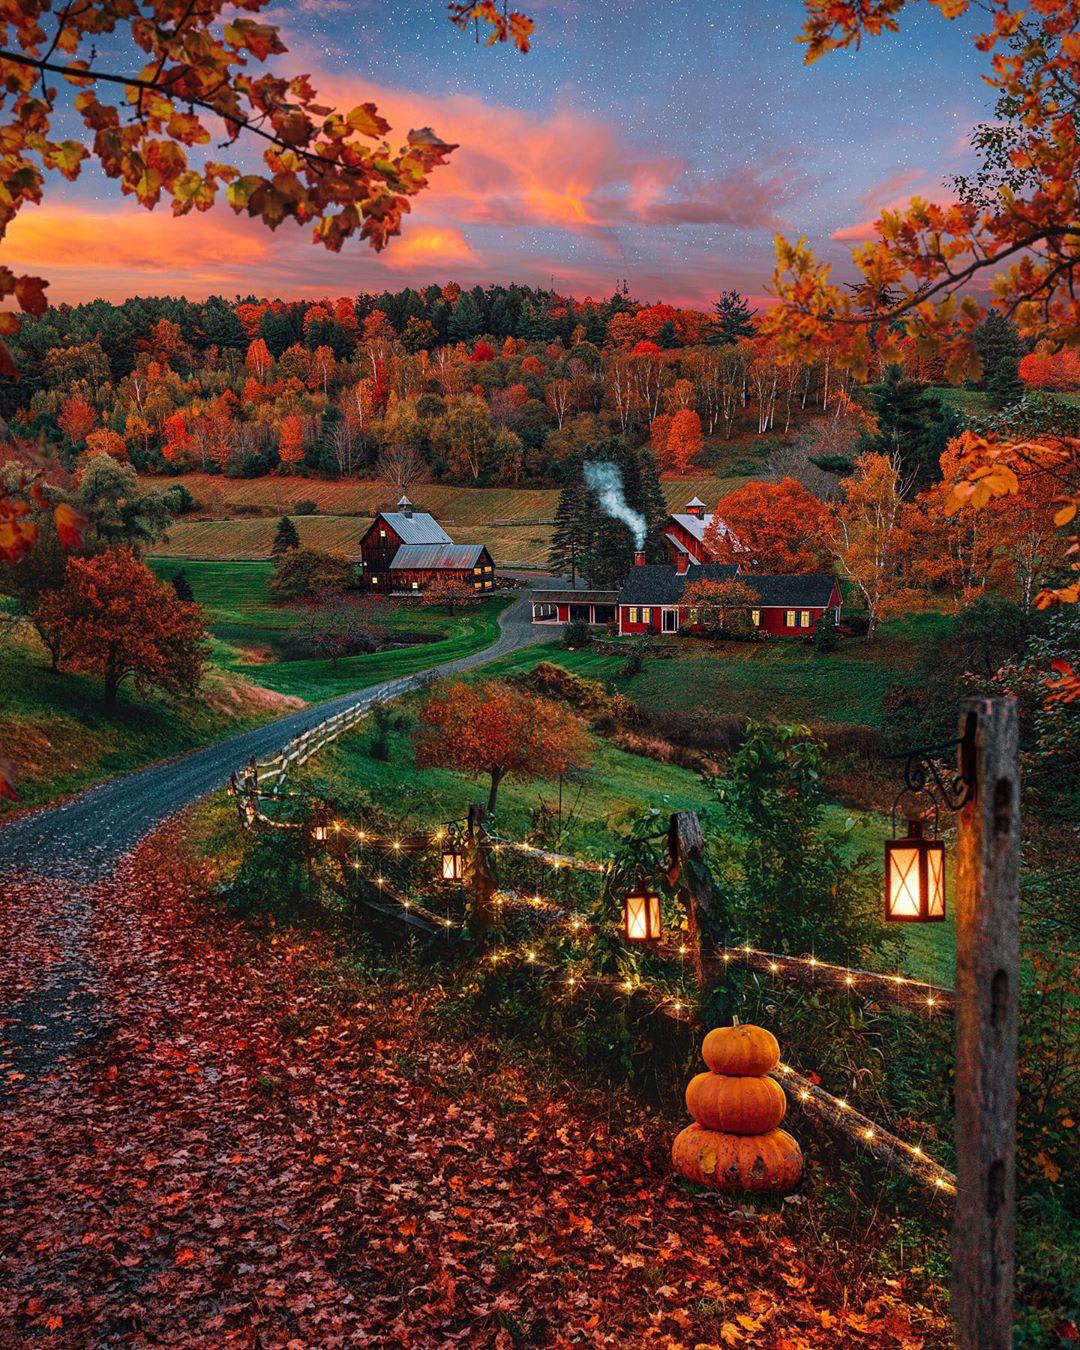 Like a fairytail - Woodstock, Vermont